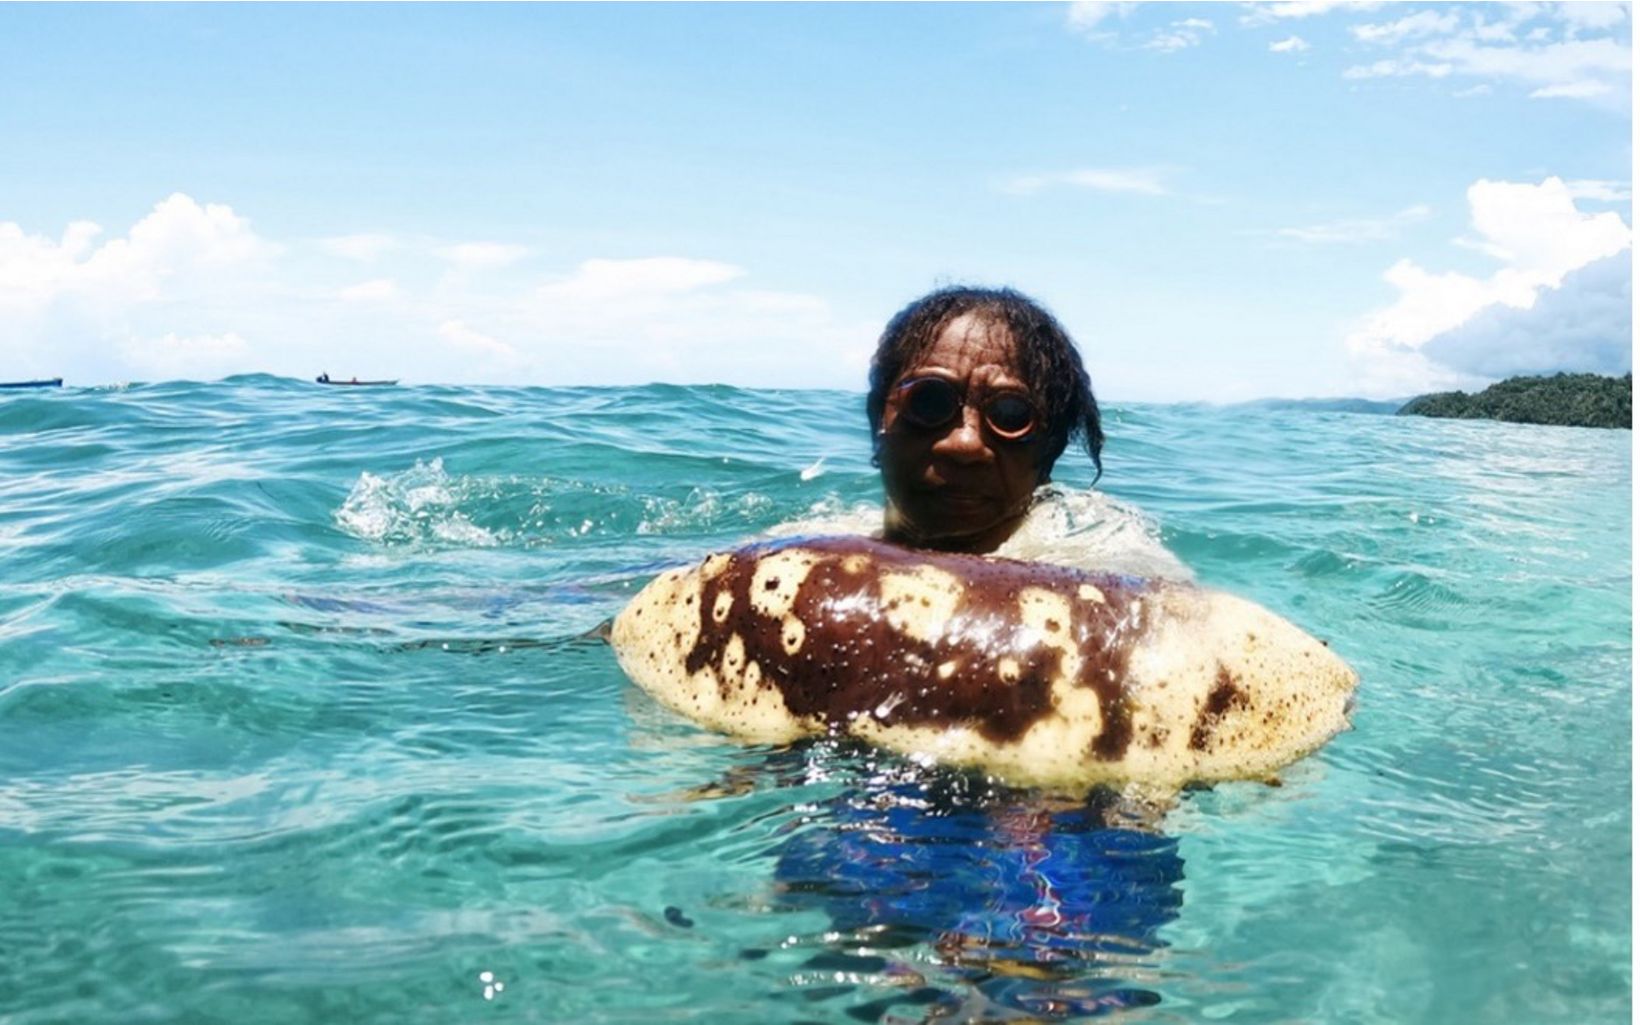  
Open Sea Sasi Event One of the members of Waifuna is picking up sea cucumbers at the time of breaking sasi. On 6 - 10 March 2022, the Waifuna Women's Group in Kapatcol Village, West Misool District, Raja Ampat Regency held an open sea sasi event. The sasi area was opened after being closed for 1 year. © Awaludinnoer/YKAN